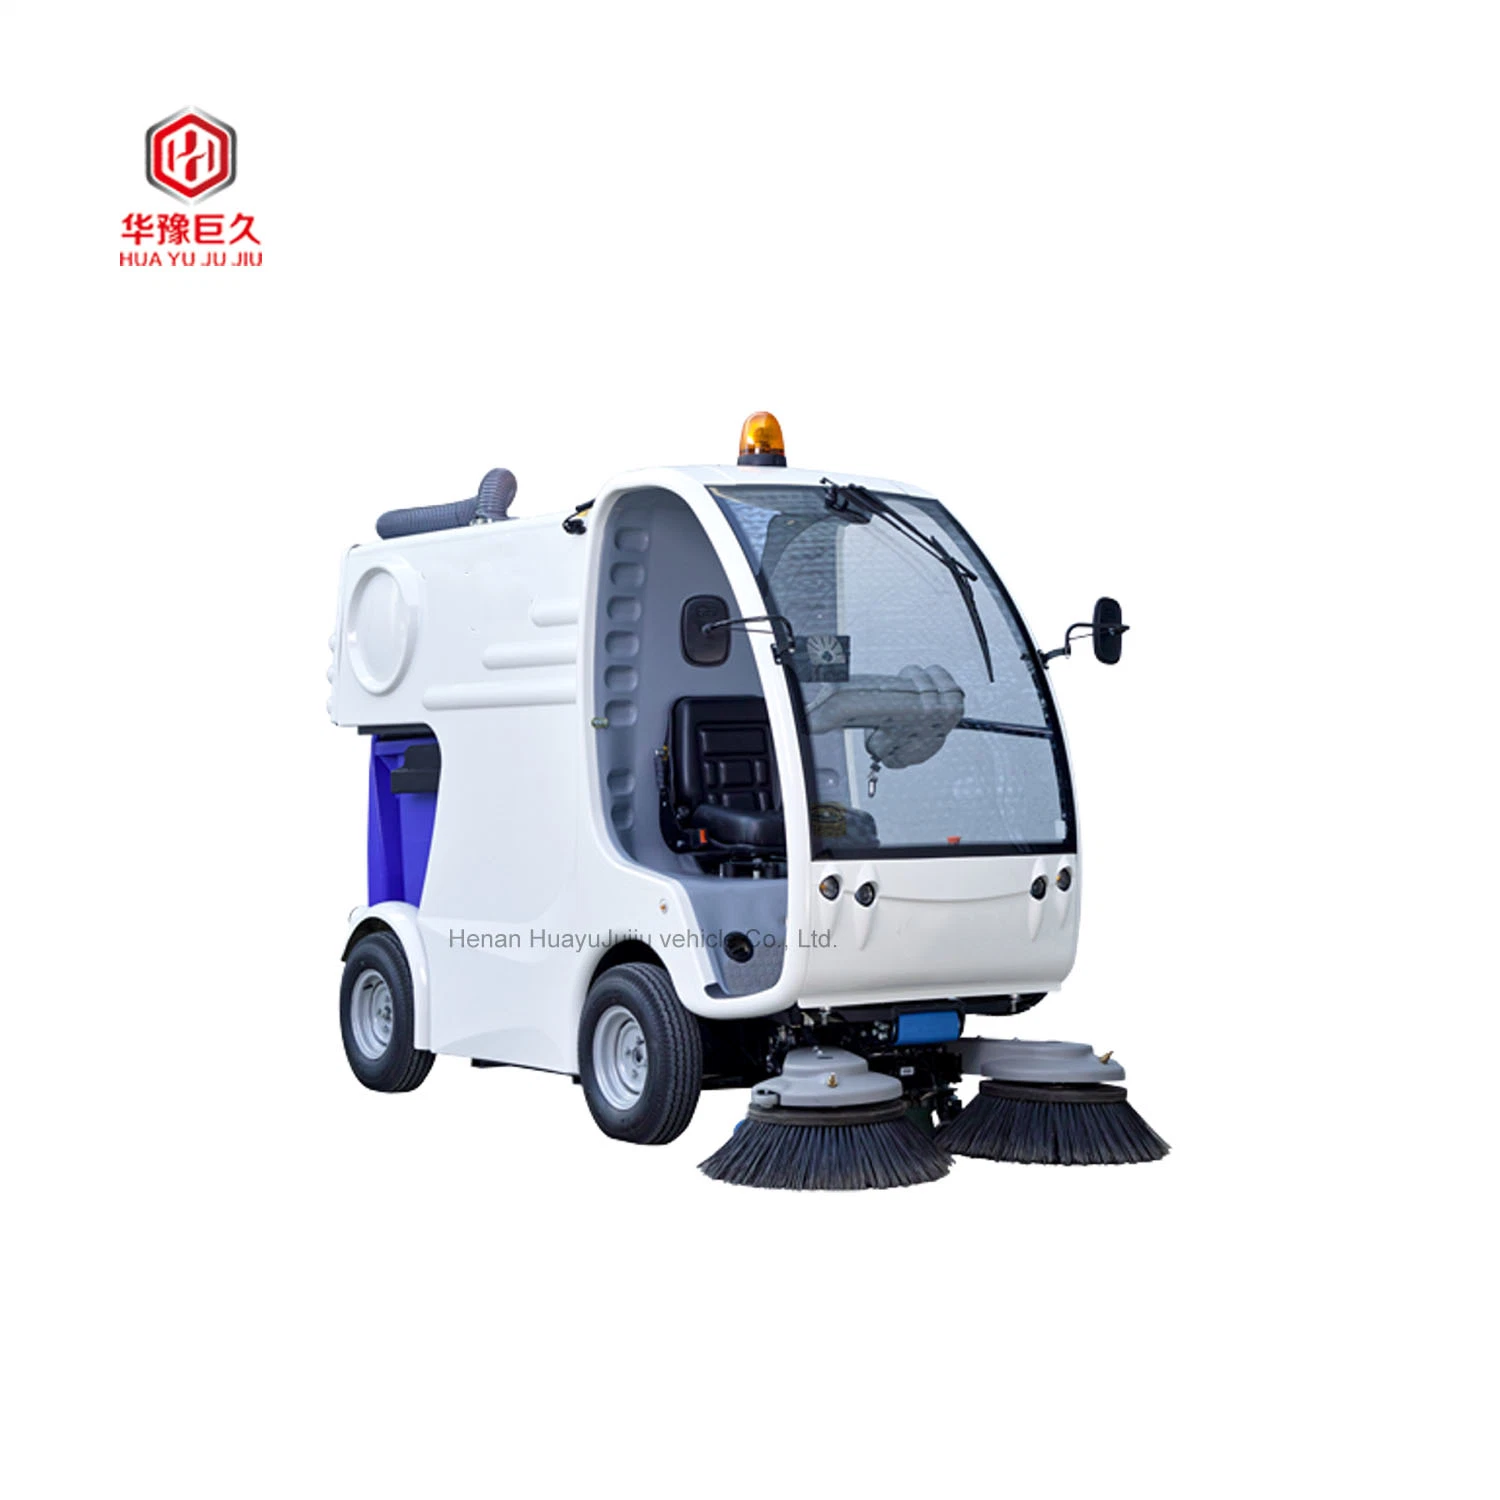 Industrial Sweeping Tool Cleaning Machine Electric Sweeper Road Cleaning Truck